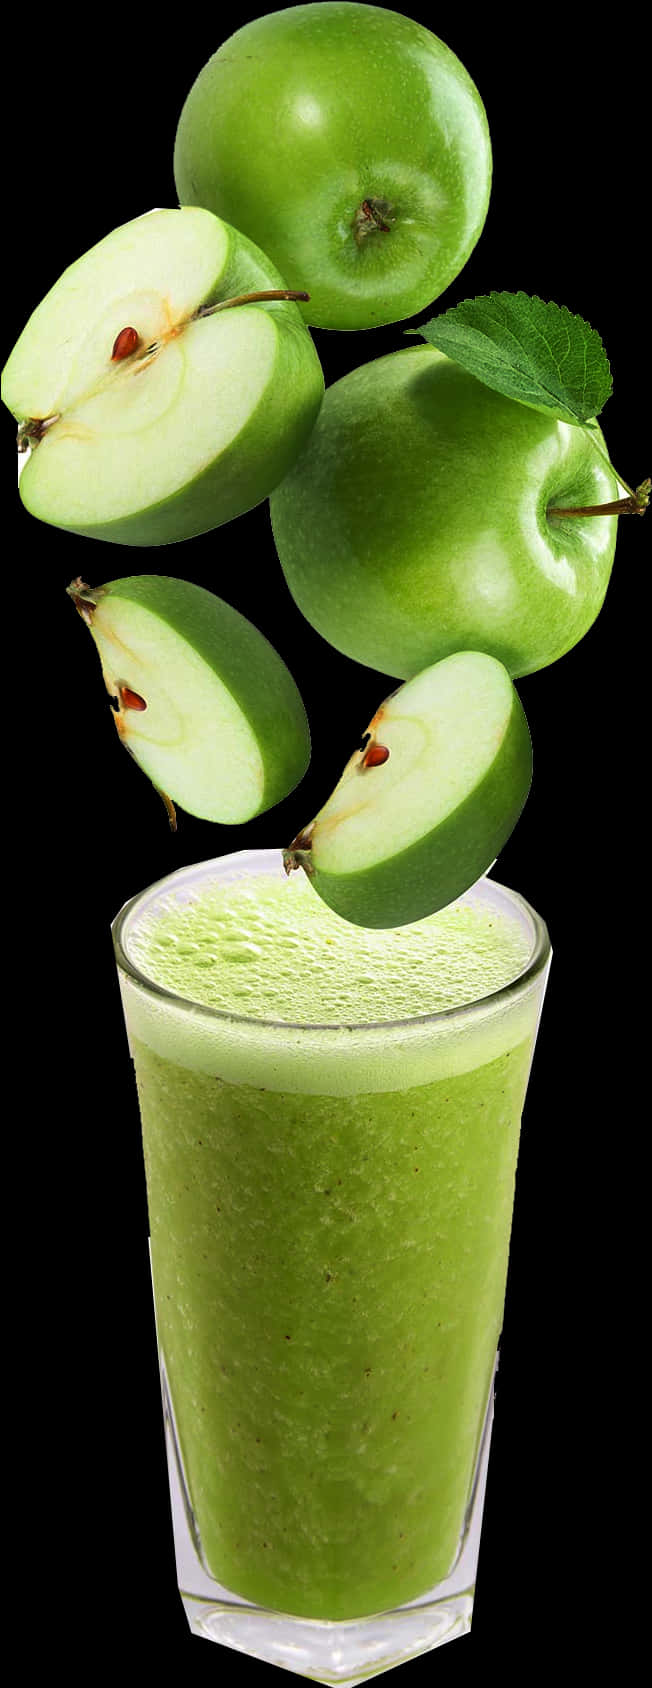 A Green Smoothie With Apples Falling Into It